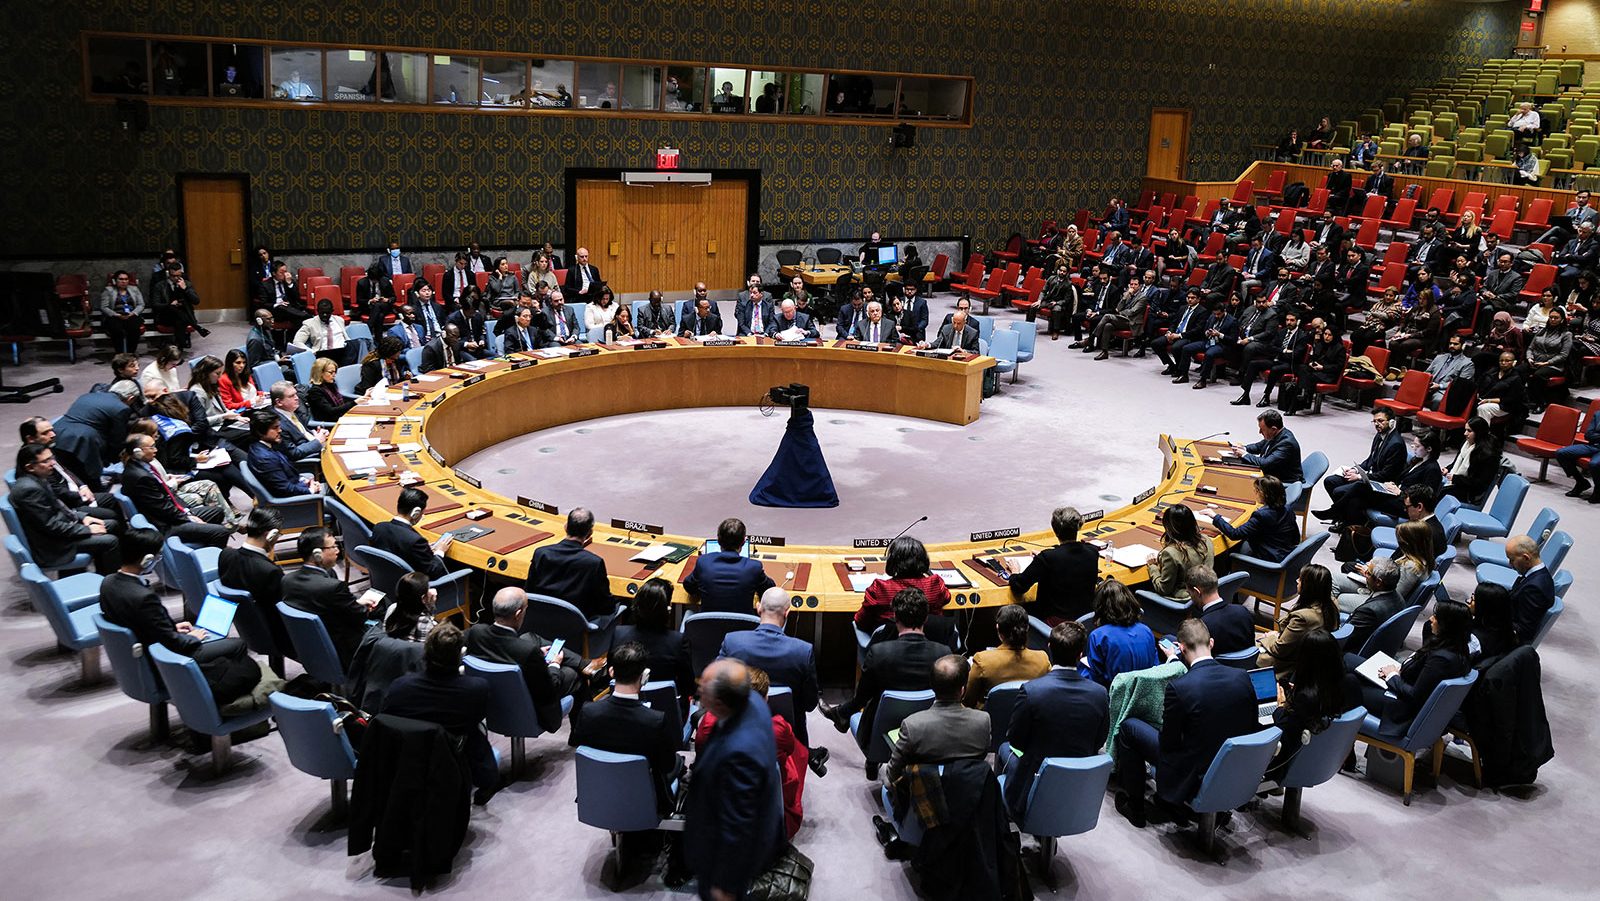 The UN Security Council has approved a resolution calling for a ceasefire in Gaza